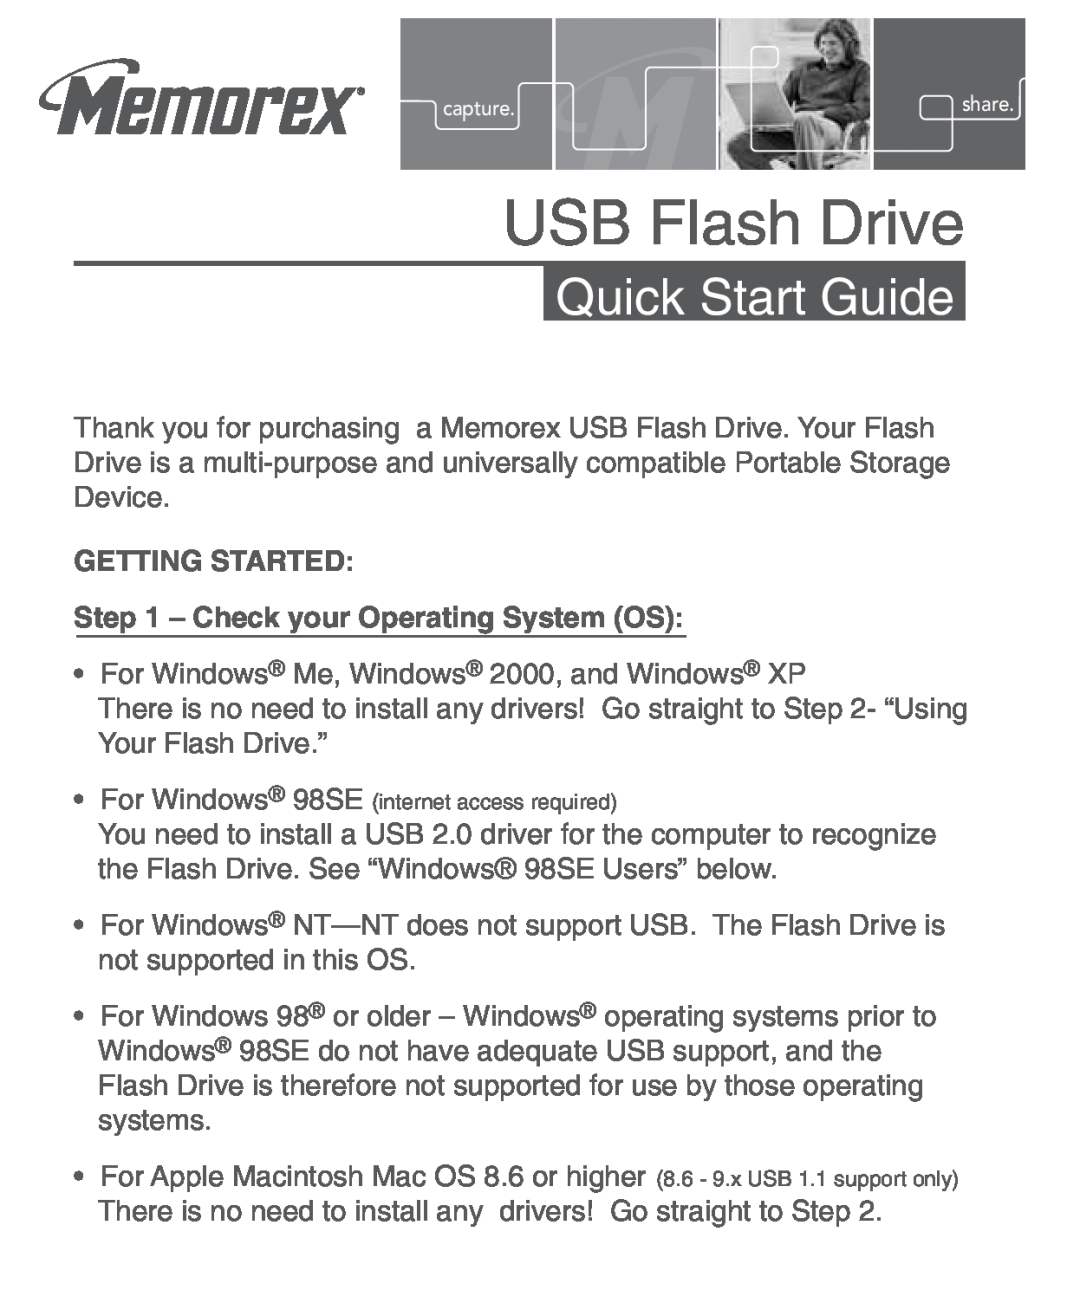 Memorex 53958662 quick start GETTING STARTED - Check your Operating System OS, USB Flash Drive, Quick Start Guide 